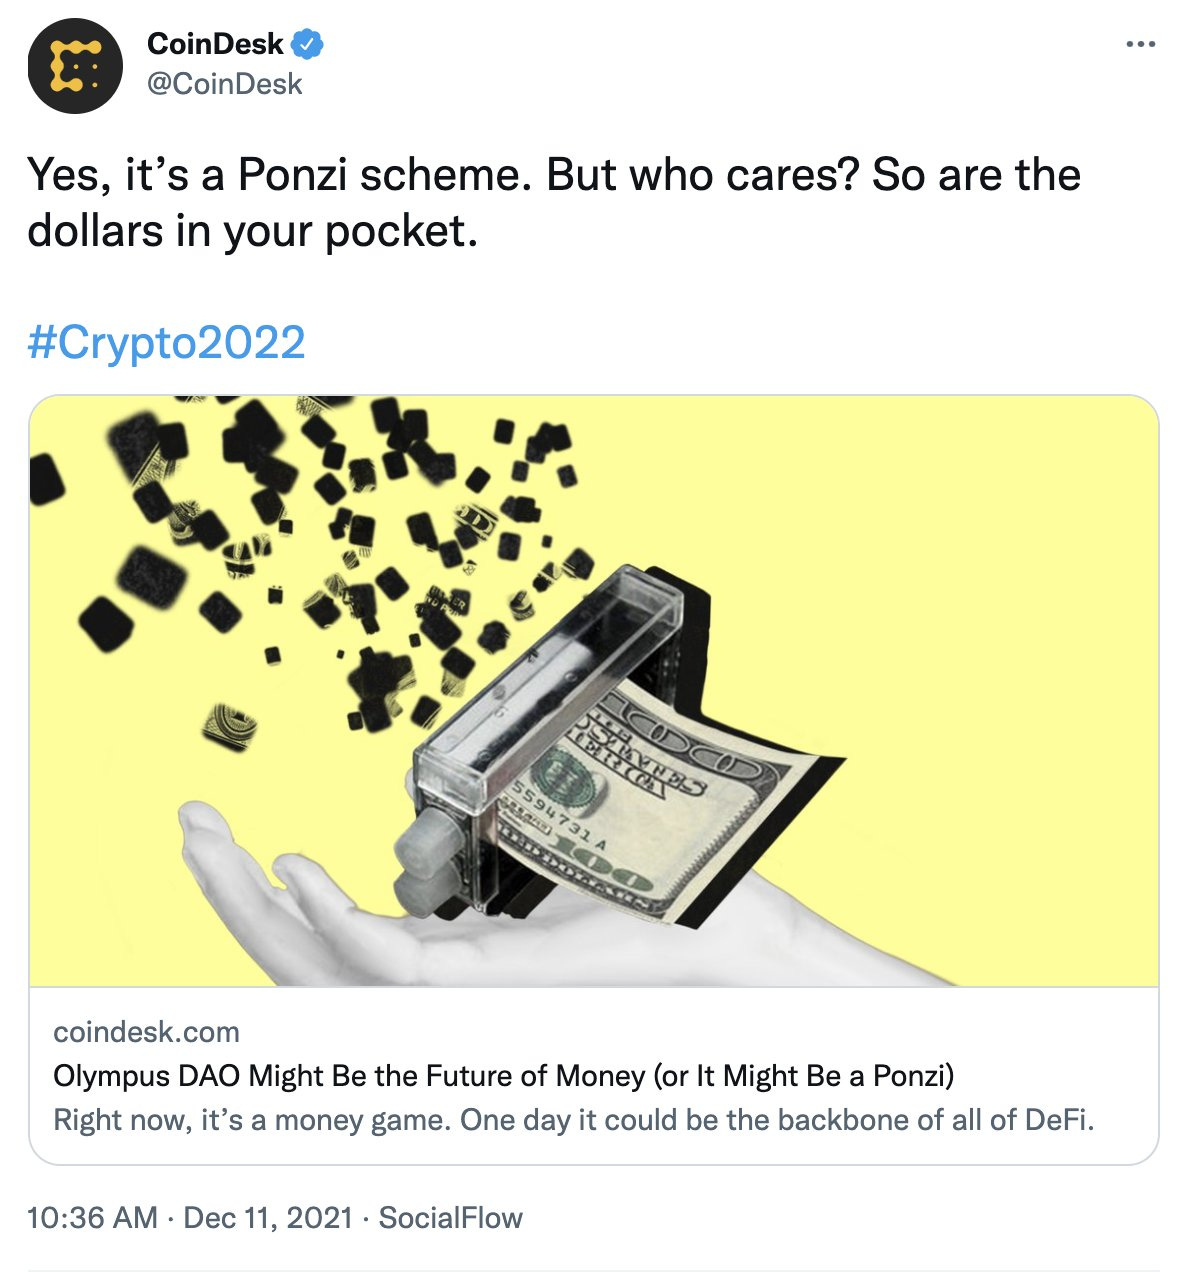 screen capture of tweet from @CoinDesk that reads: Yes, it’s a Ponzi scheme. But who cares? So are the dollars in your pocket.

#Crypto2022

The photo is a yellow background with a black and white image of an open hand turned upward holding money shredder. A $100 dollar bill is going into the shredder and the shredded bits are floating up and away. 